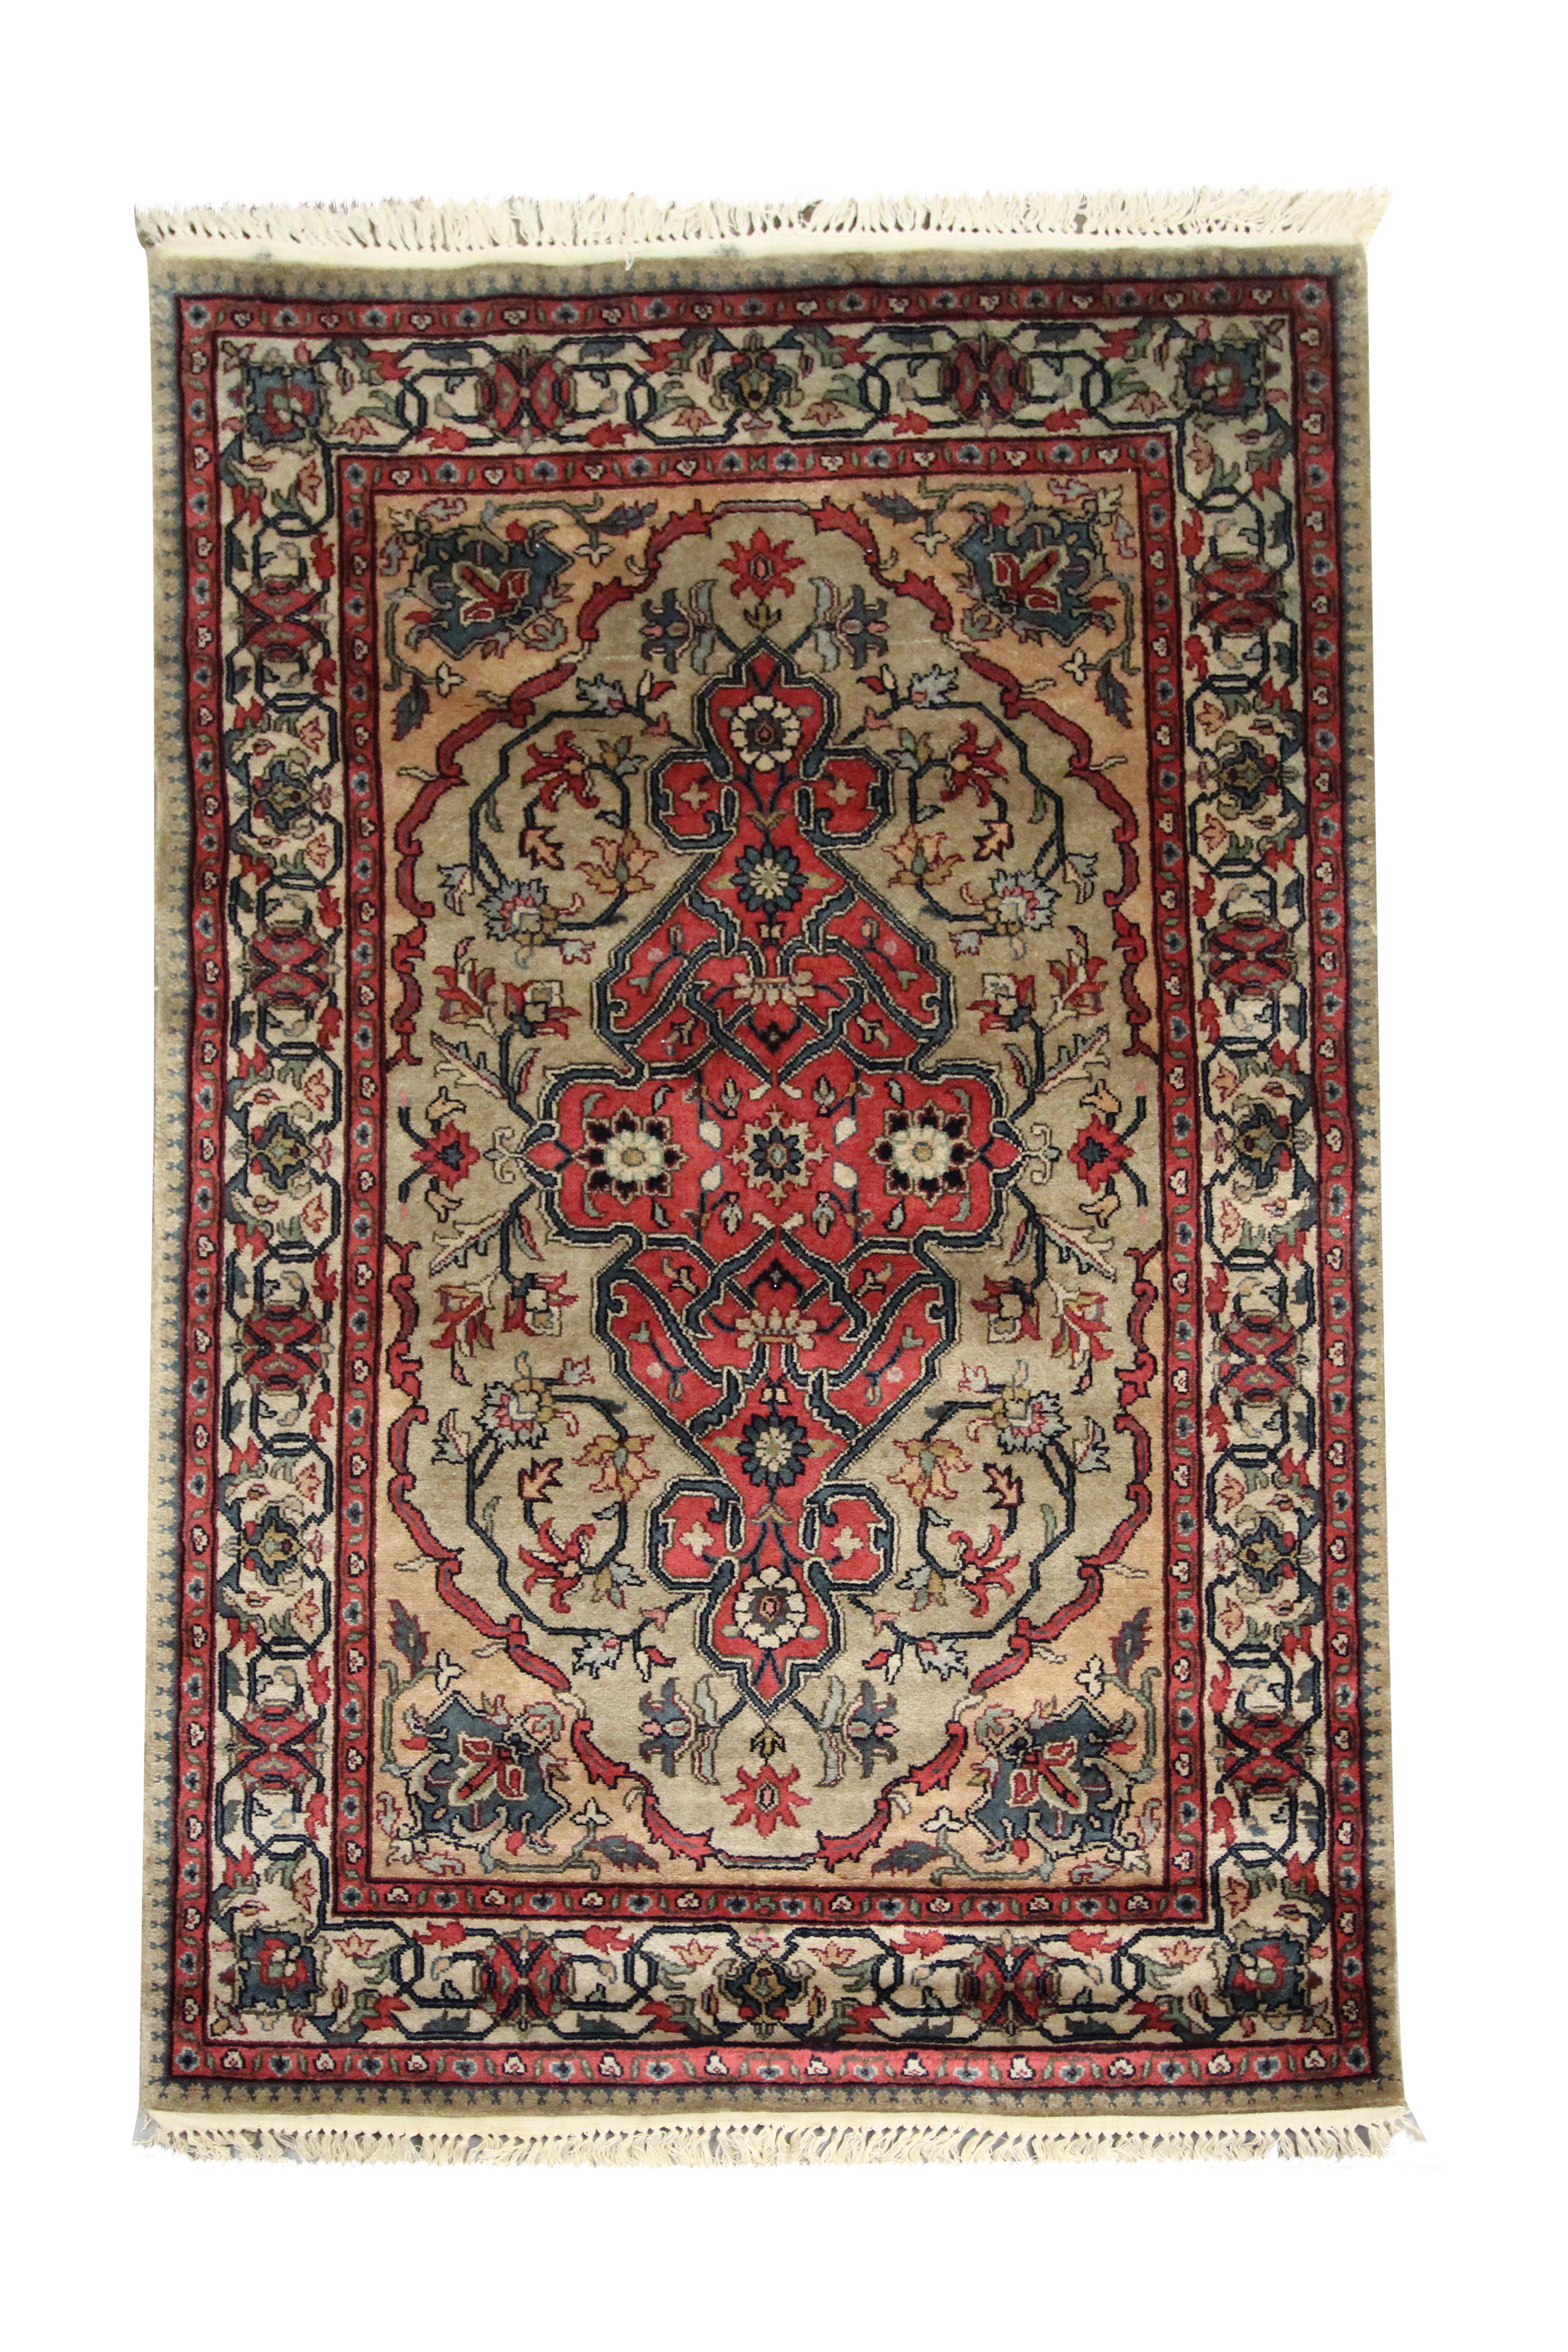 This bold wool rug is an Indian carpet woven in the early 2000s. The design has been intricately woven and features a detailed symmetrical pattern woven in accents of green, red, beige and blue. Decorated with intricate hook motifs and geometric